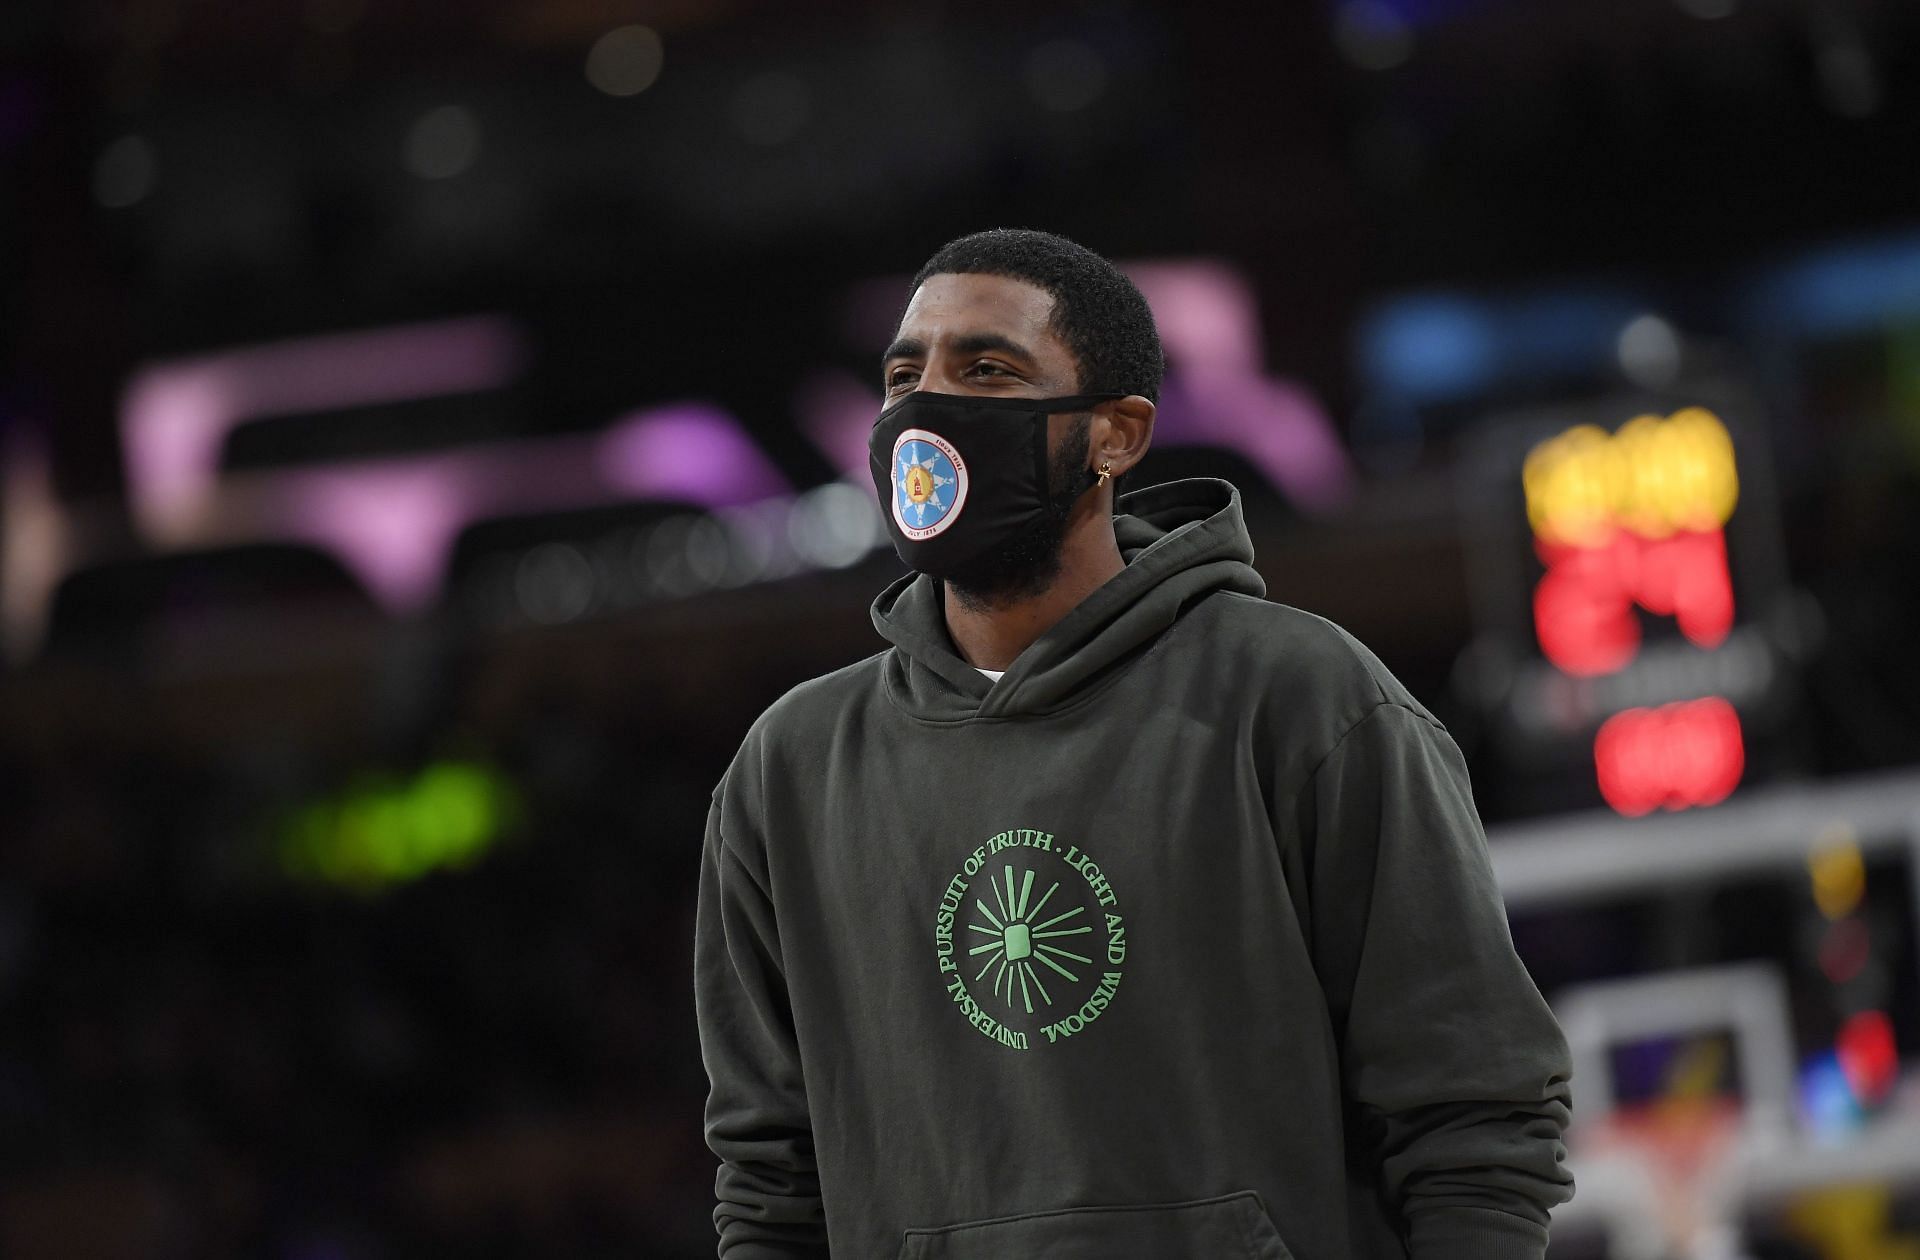 Brooklyn Nets star Kyrie Irving has refused to get vaccinated against COVID-19